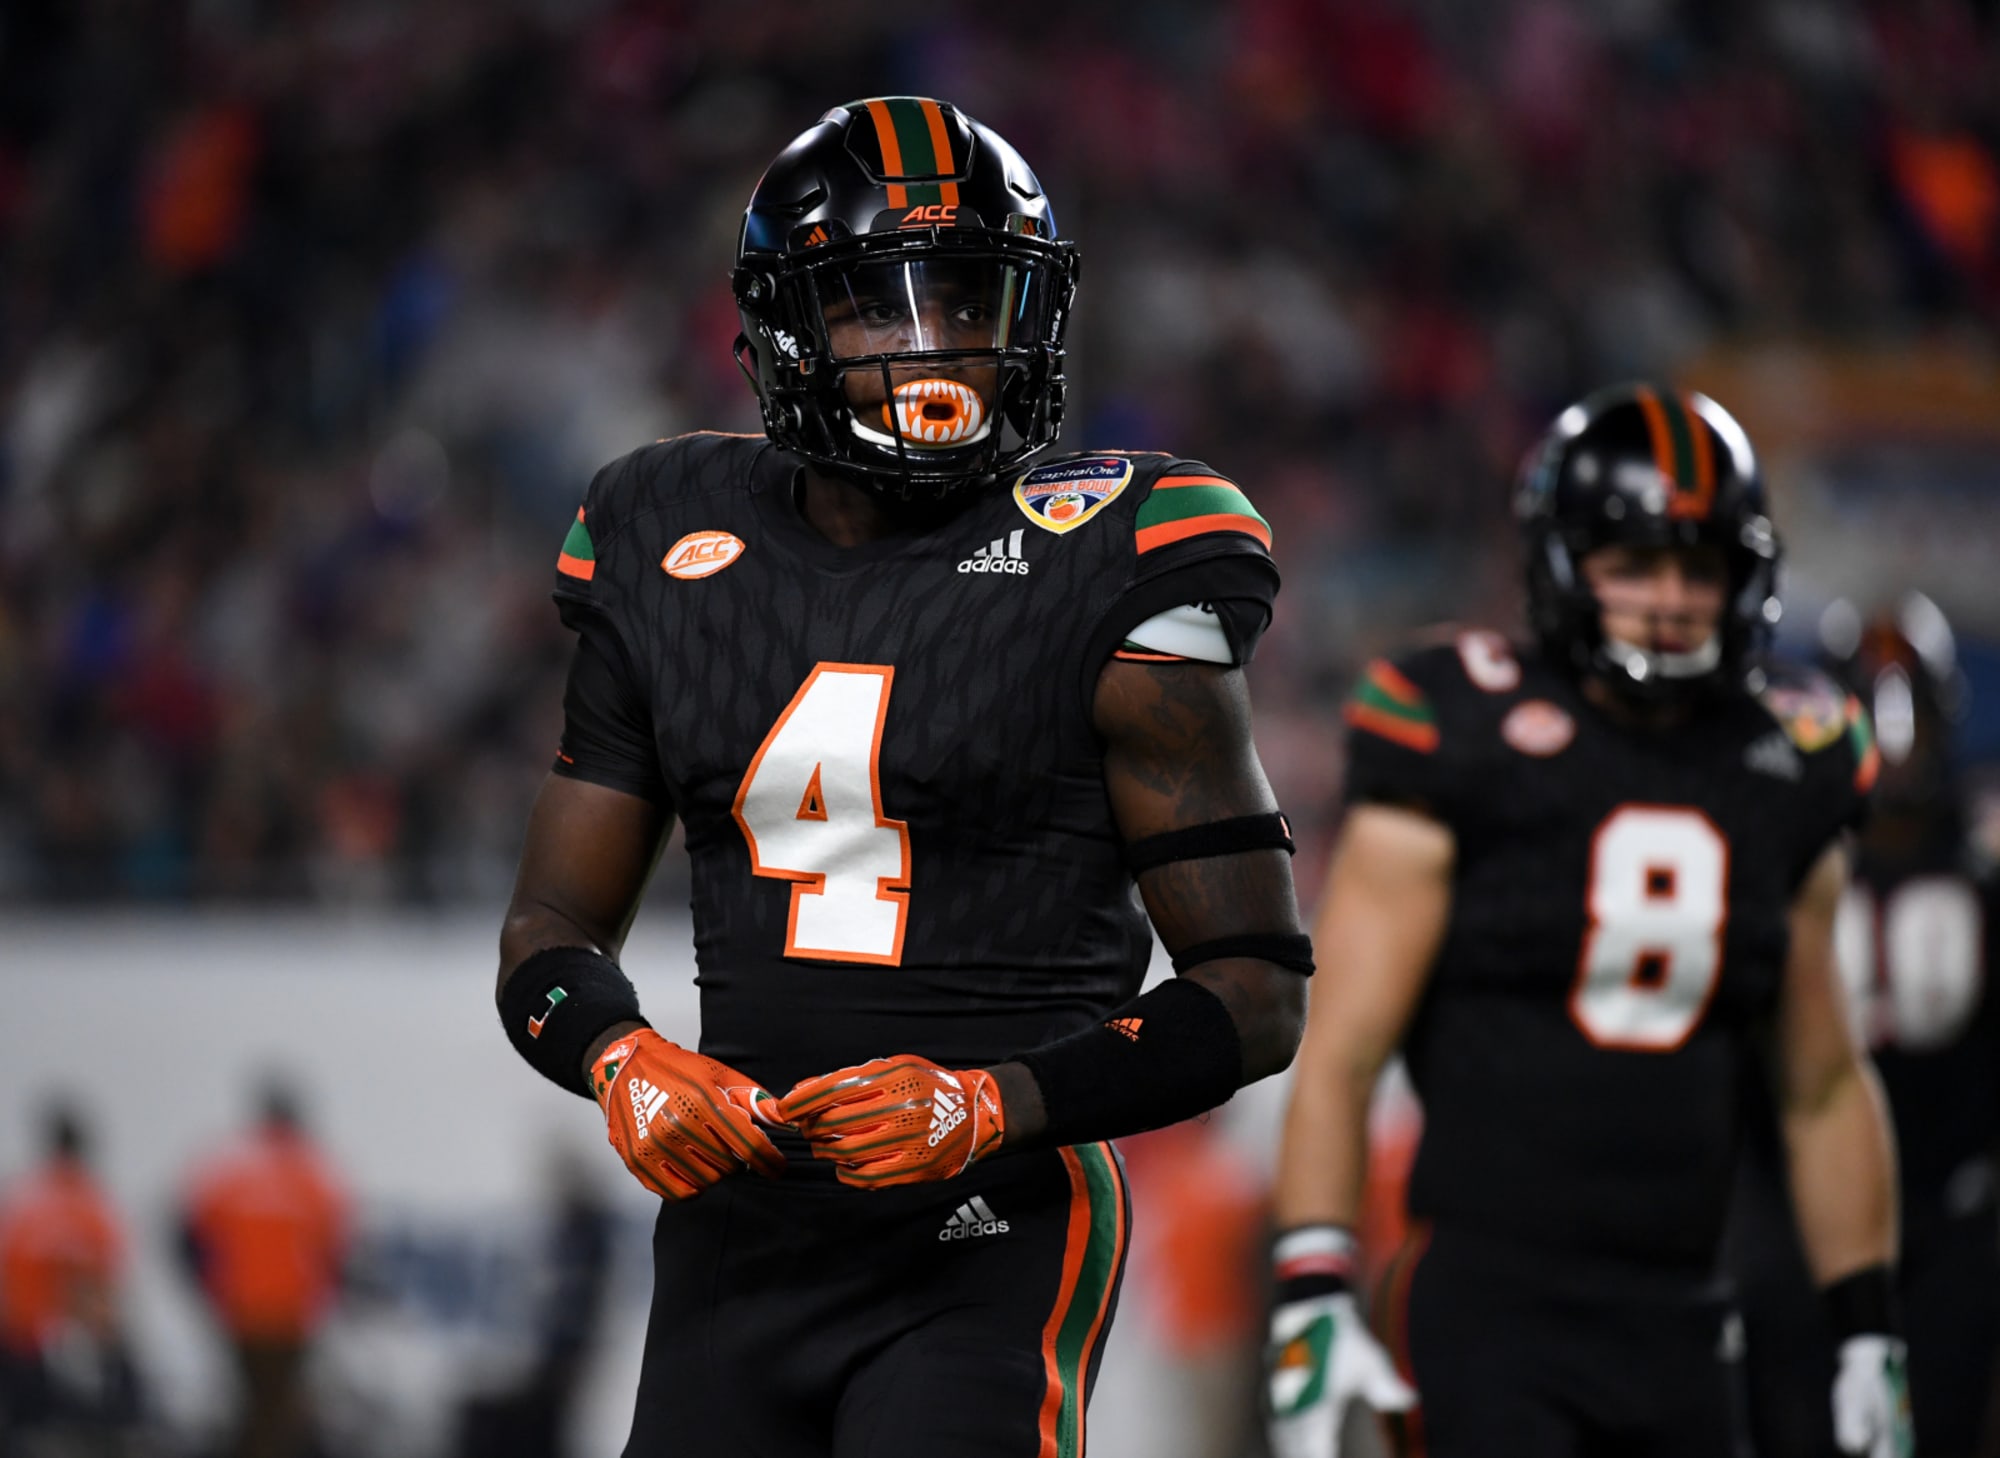 Miami Hurricanes football adding black and green jerseys for 2017